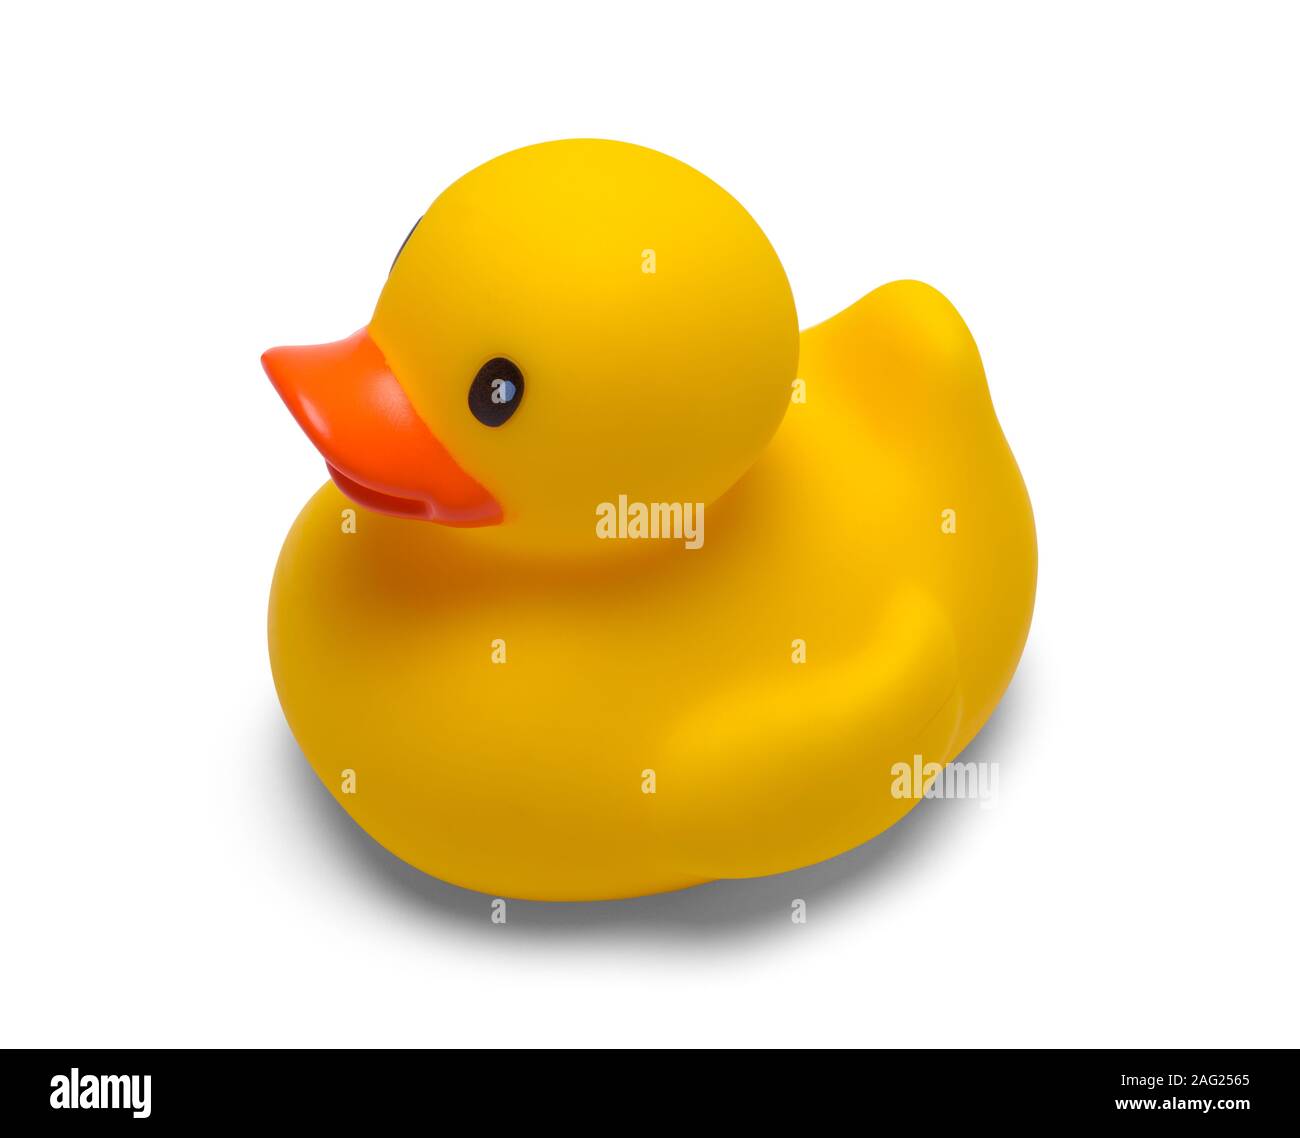 Toy Rubber Duck Isolated on White  Background. Stock Photo